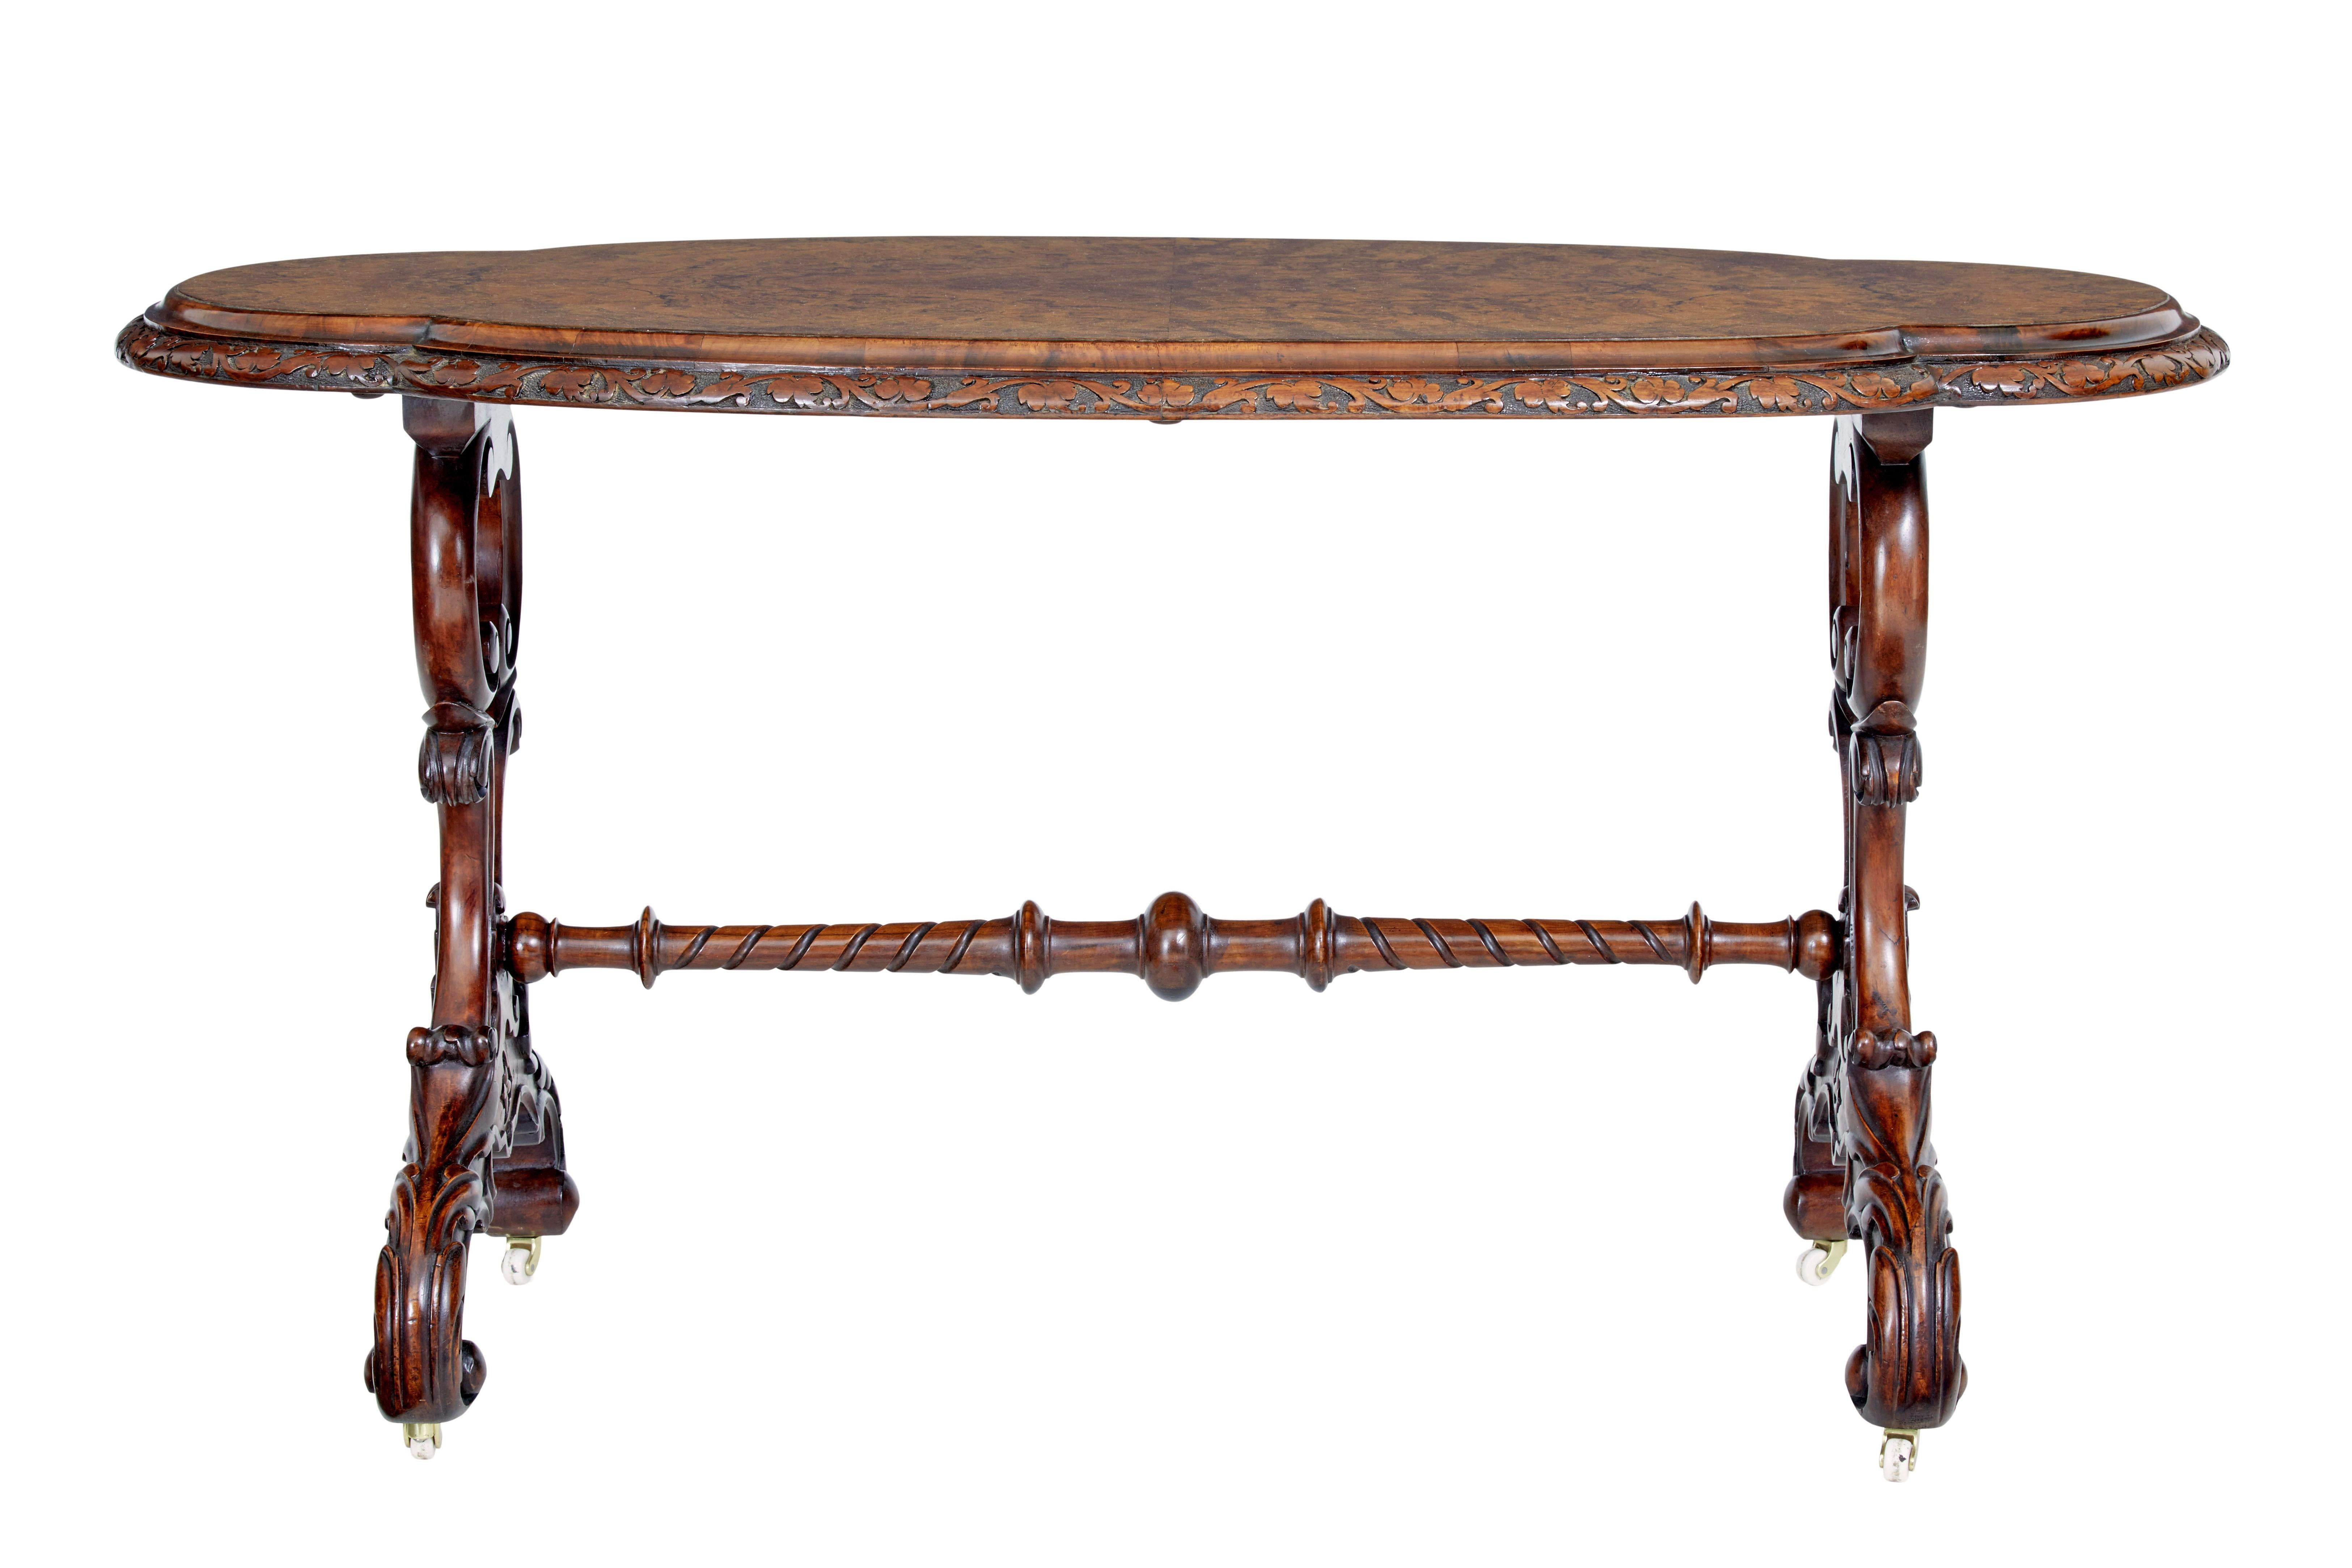 Victorian carved oval occasional table, circa 1860.

Shaped top with beautifully carved in solid walnut around the edge, quarter veneered burr walnut top surface. Standing on a pierced and carved base. United by stretcher.

Raised on original